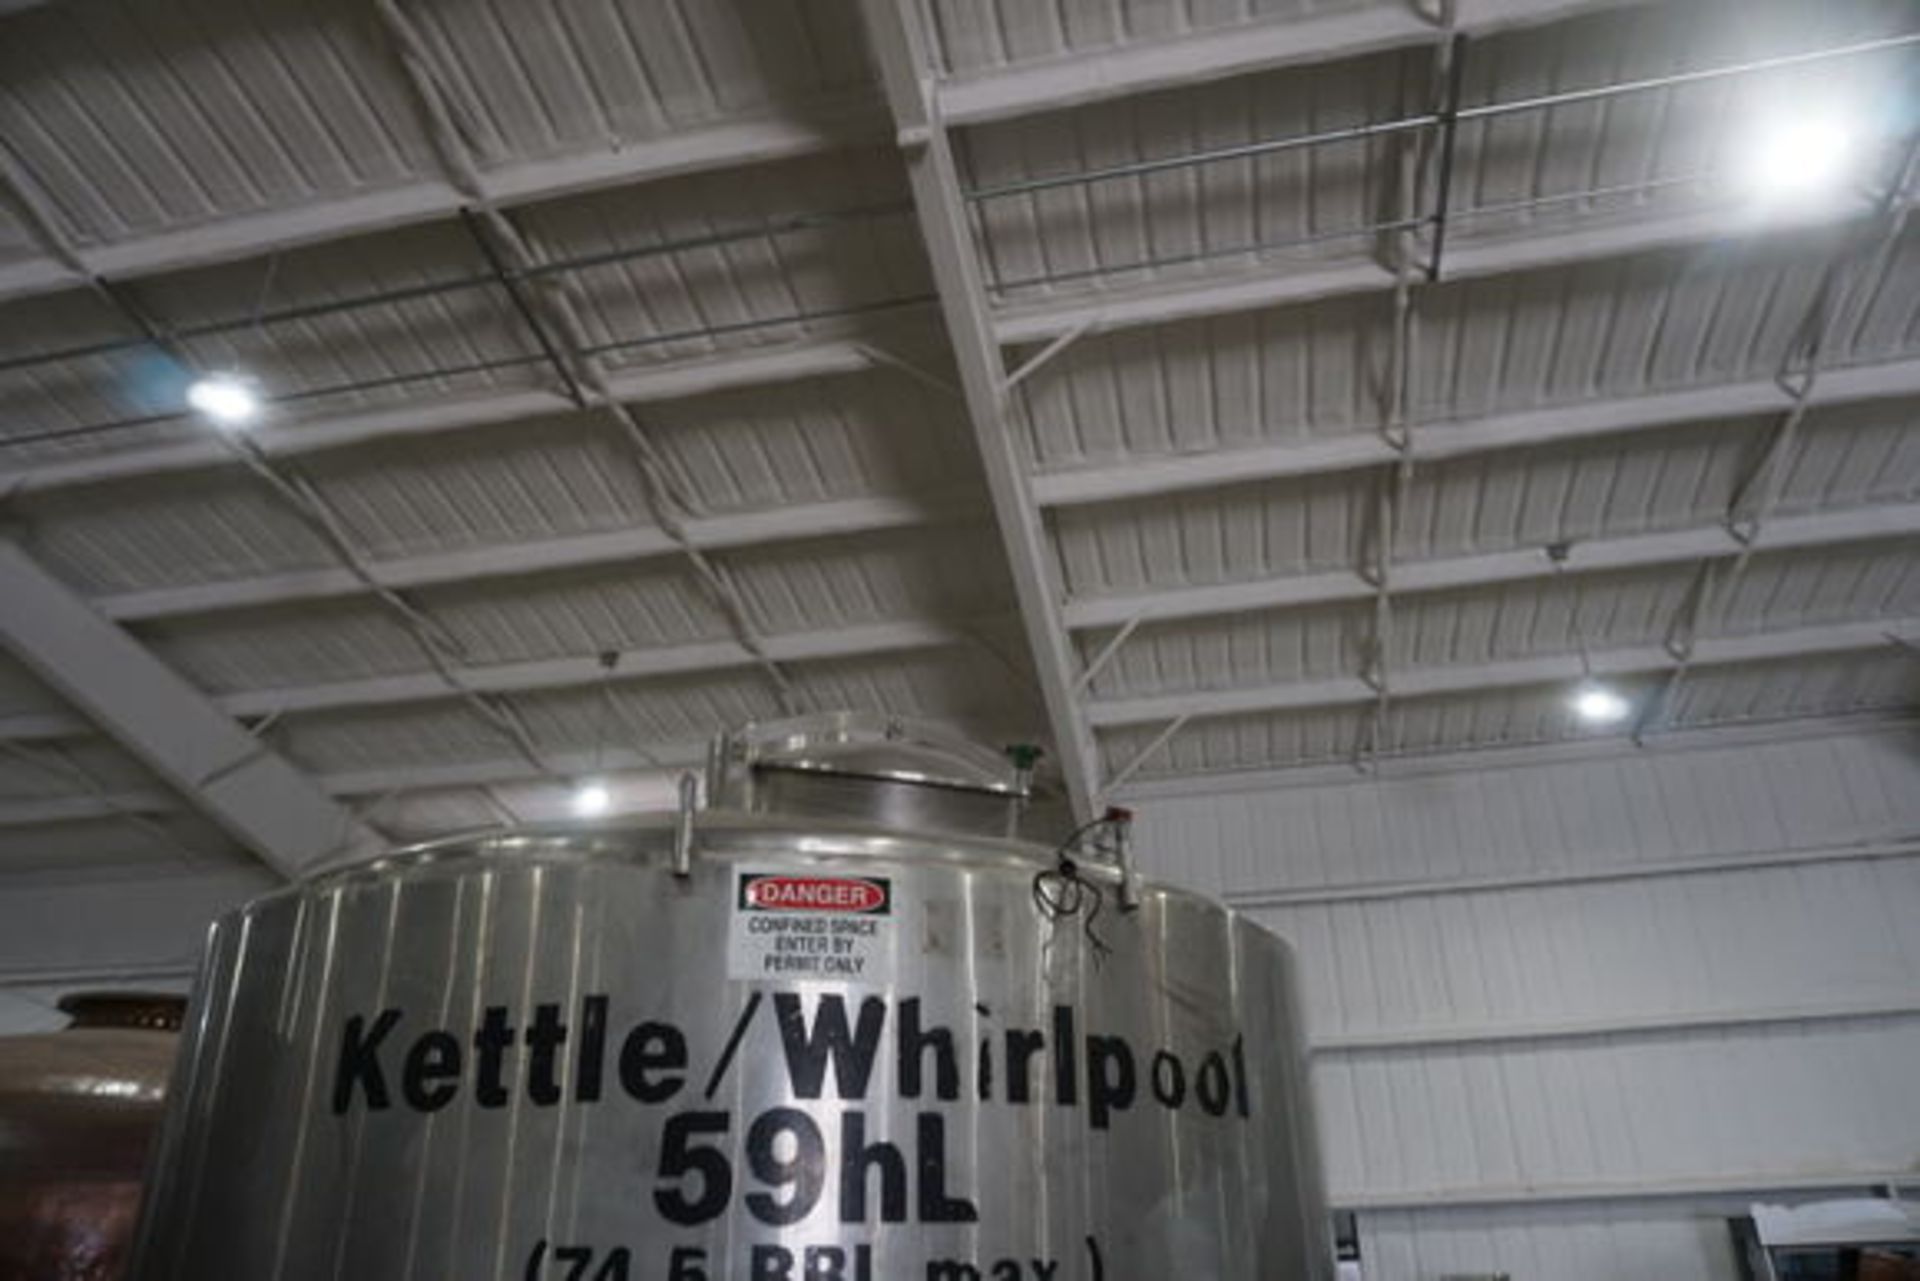 Stainless Steel Mixing Kettle/ Whirpool Tank, 59HL, 745 BBL Max Cap (LOCATION: ROME, TX) - Image 2 of 10